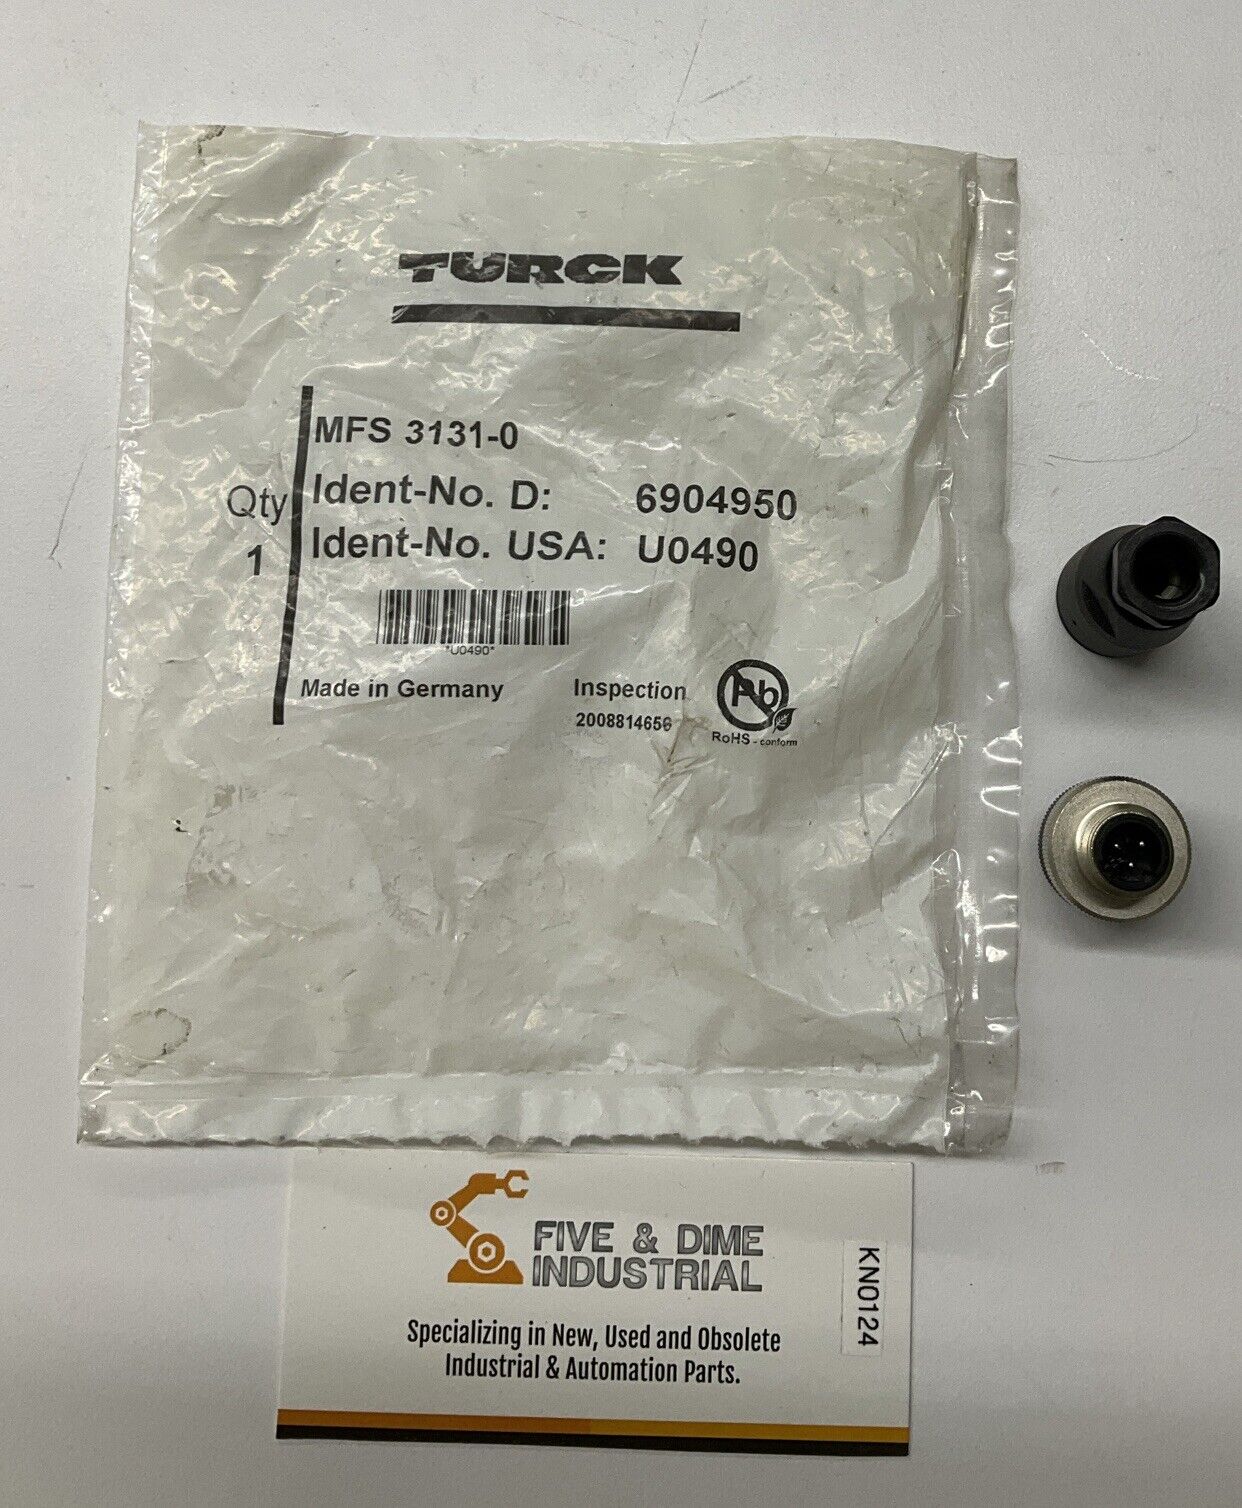 Turck MFS 3131-0 Male Connector (CL298)